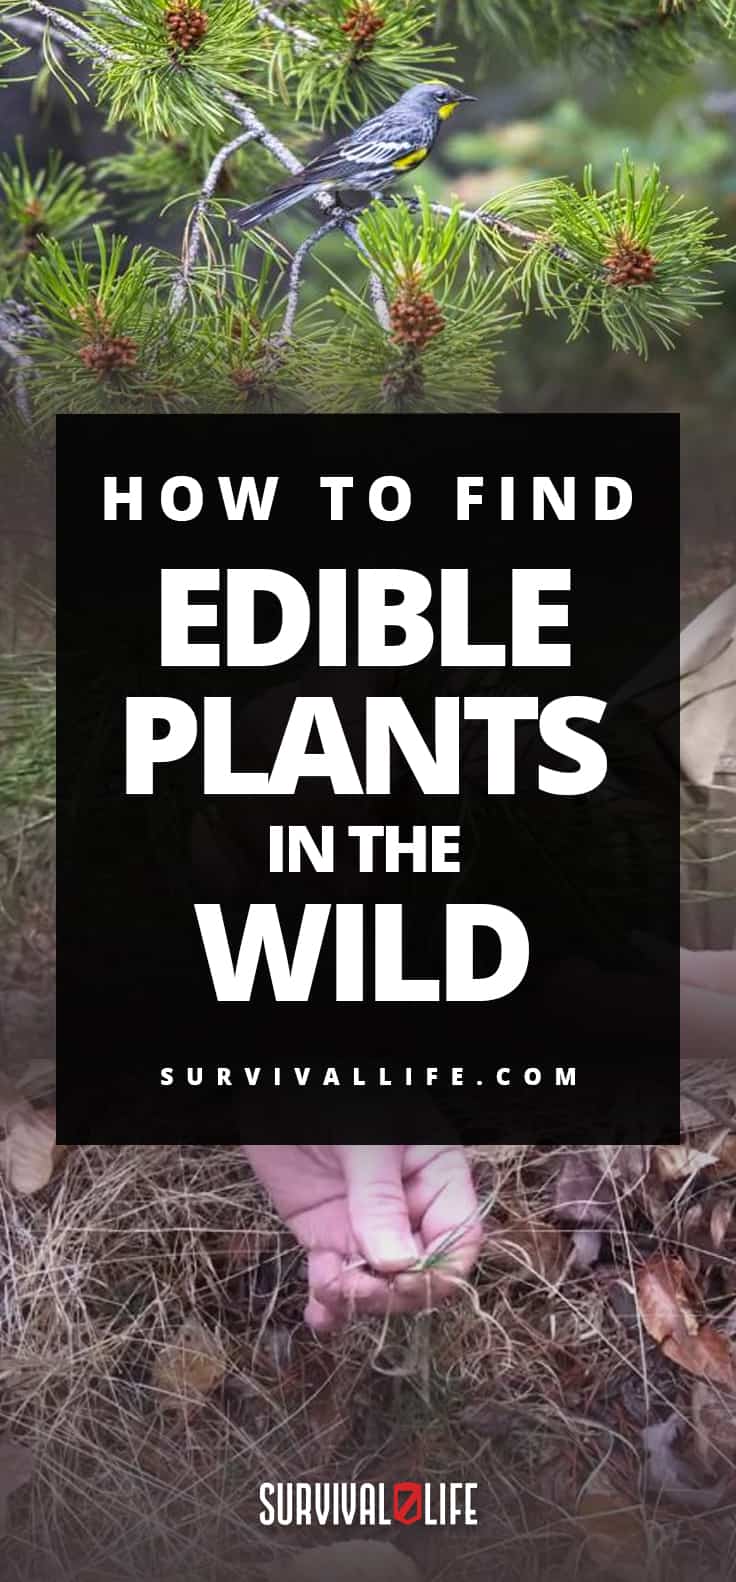 How to Find Edible Plants in the Wild